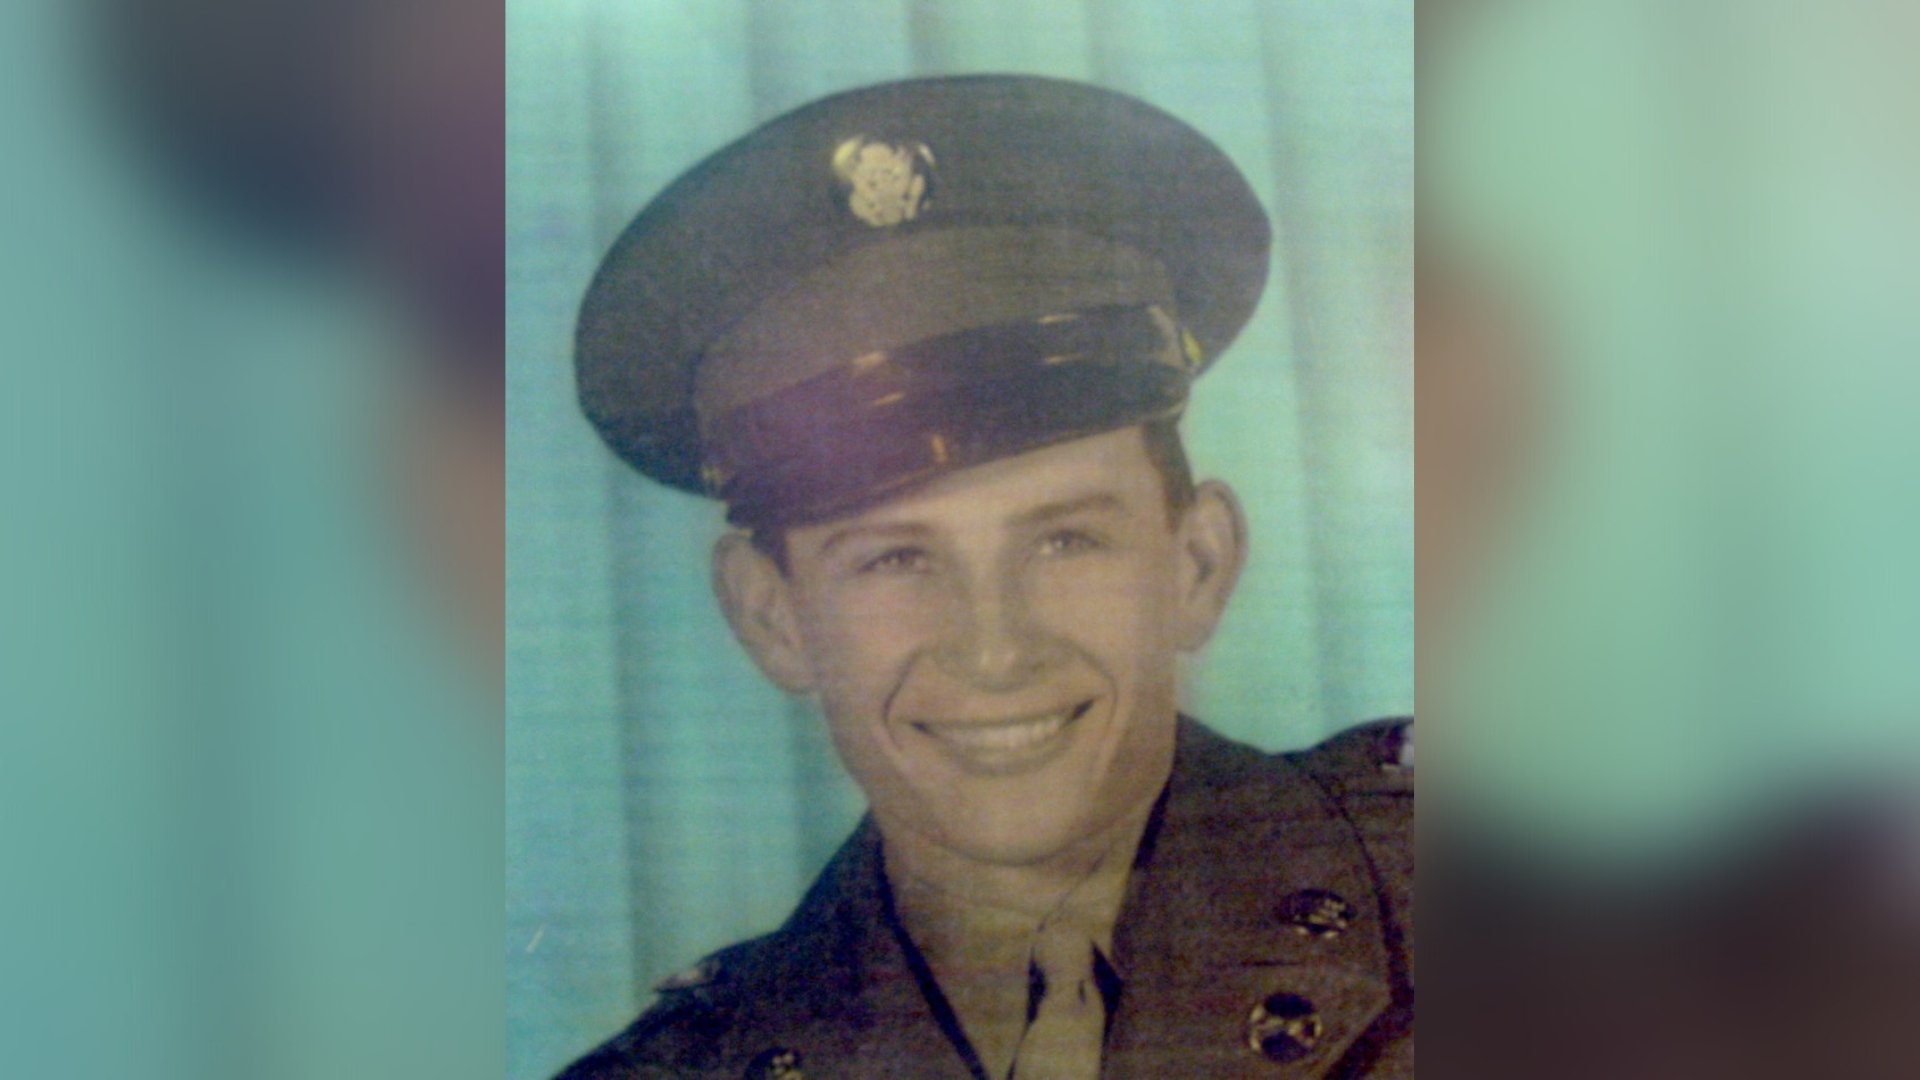 A Georgia town lays a Korean War veteran to rest, over 70 years after his death